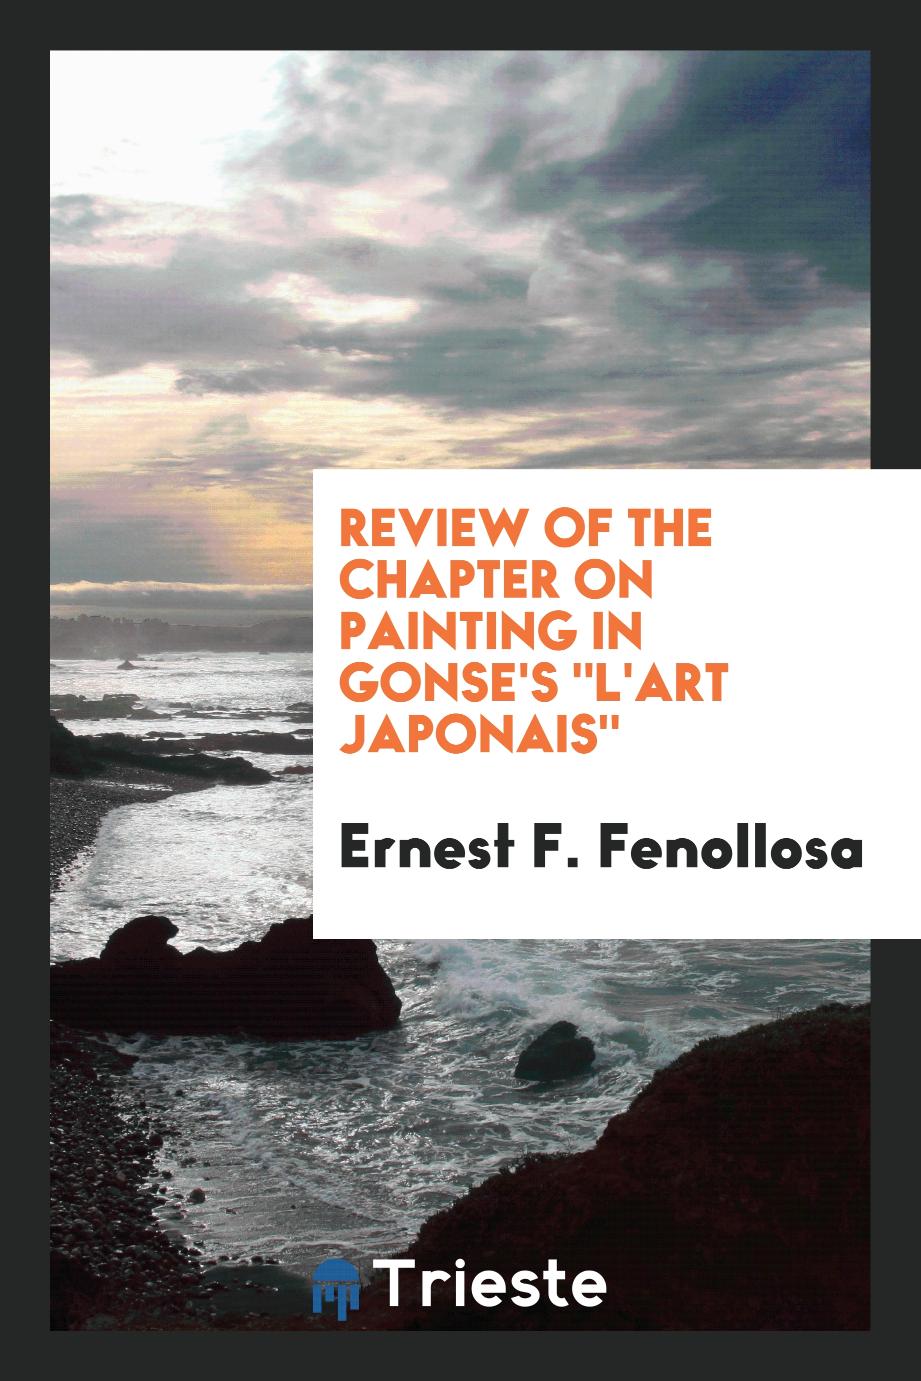 Review of the Chapter on Painting in Gonse's "L'Art Japonais"